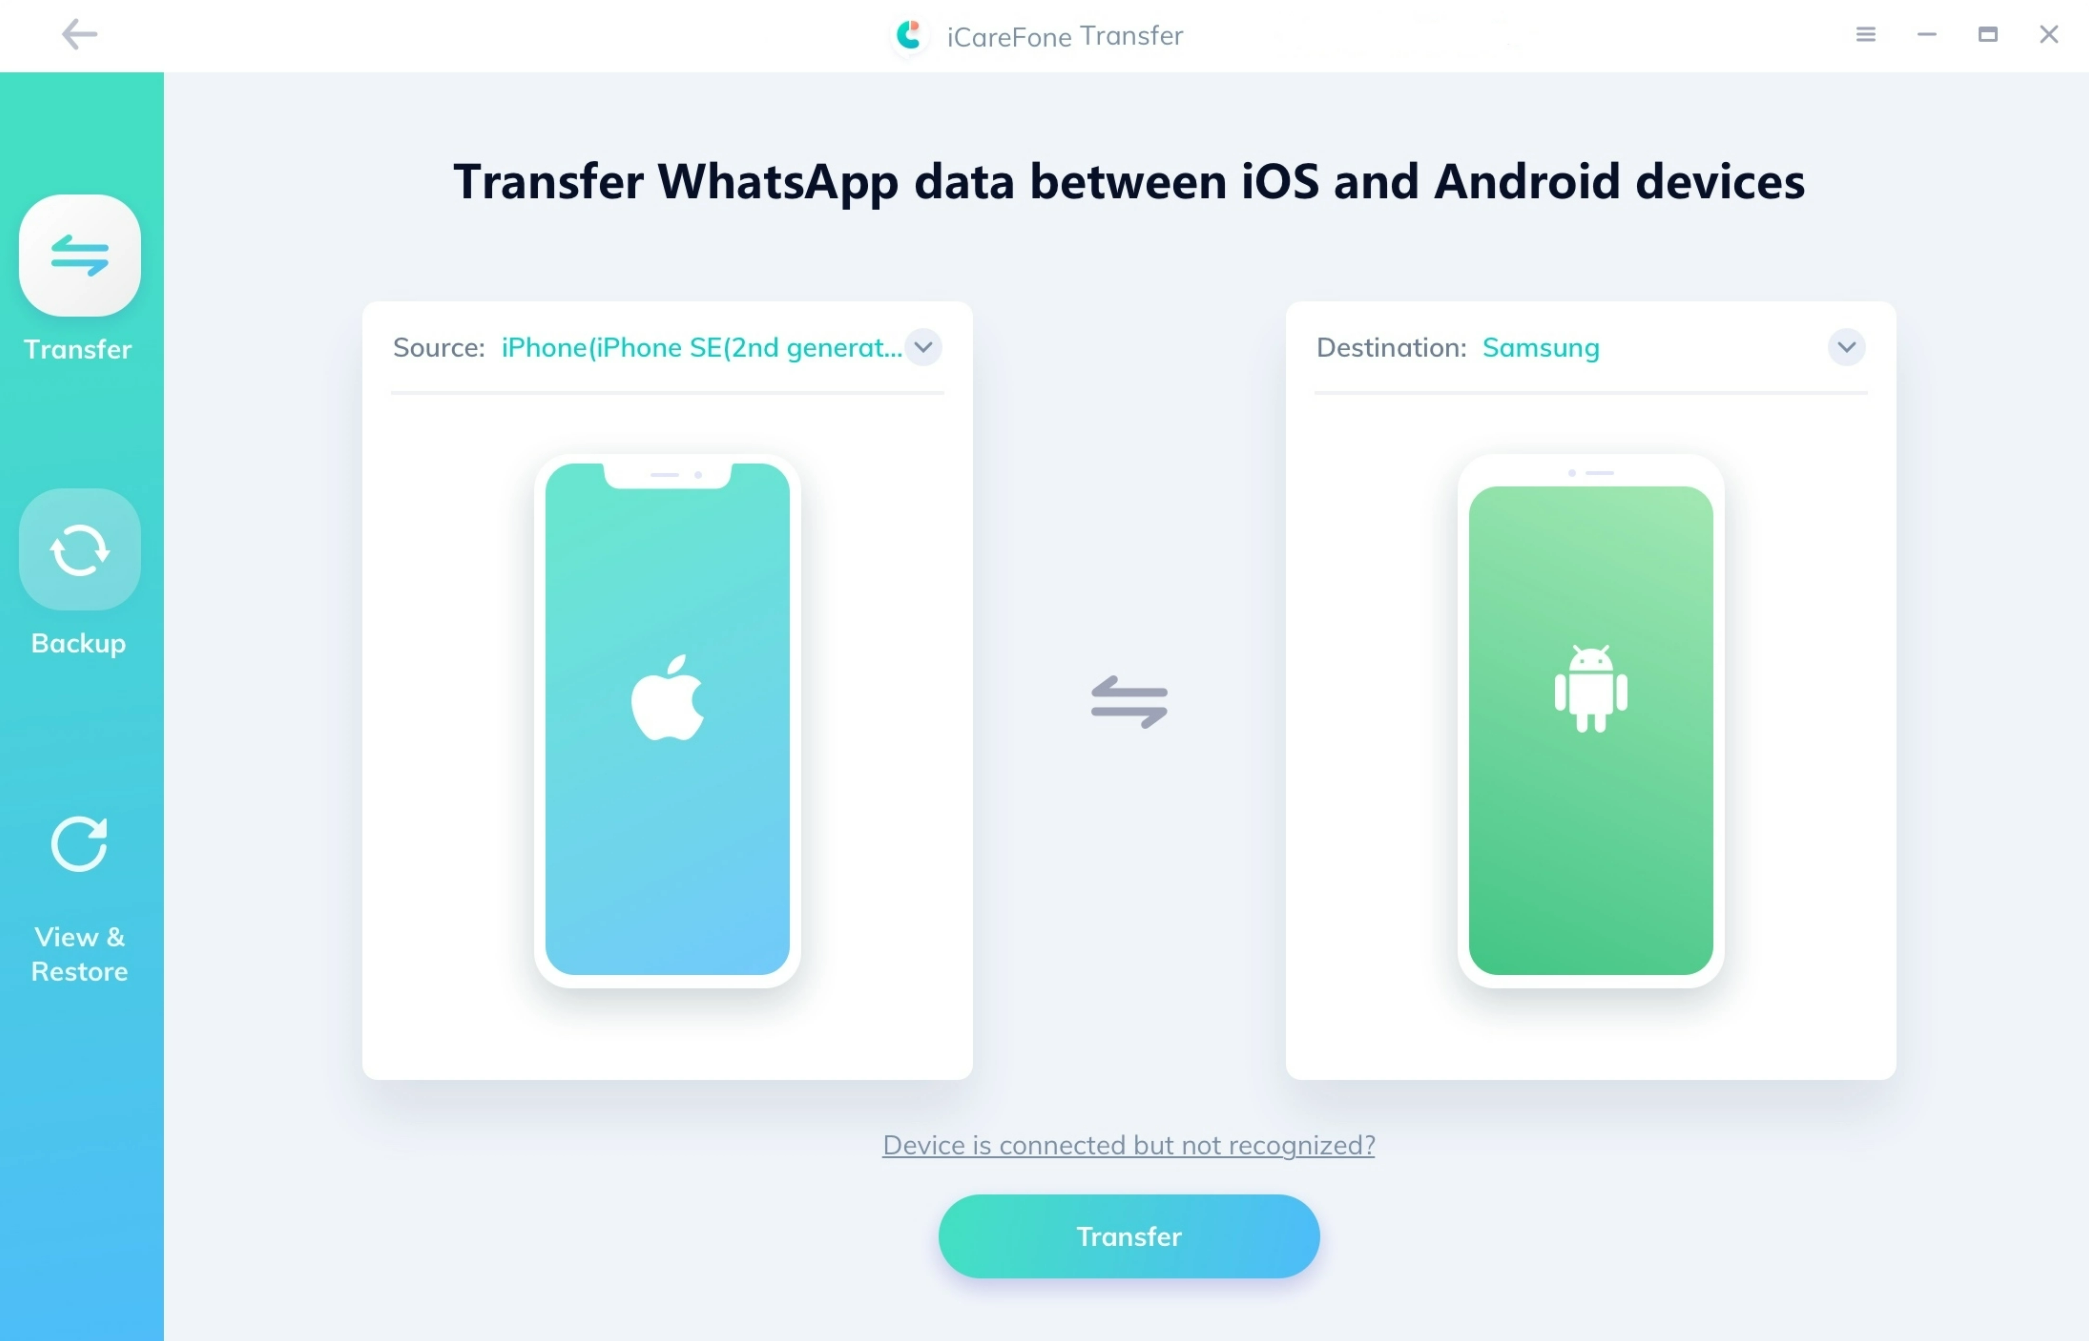 Transfering data between iOS and Android.